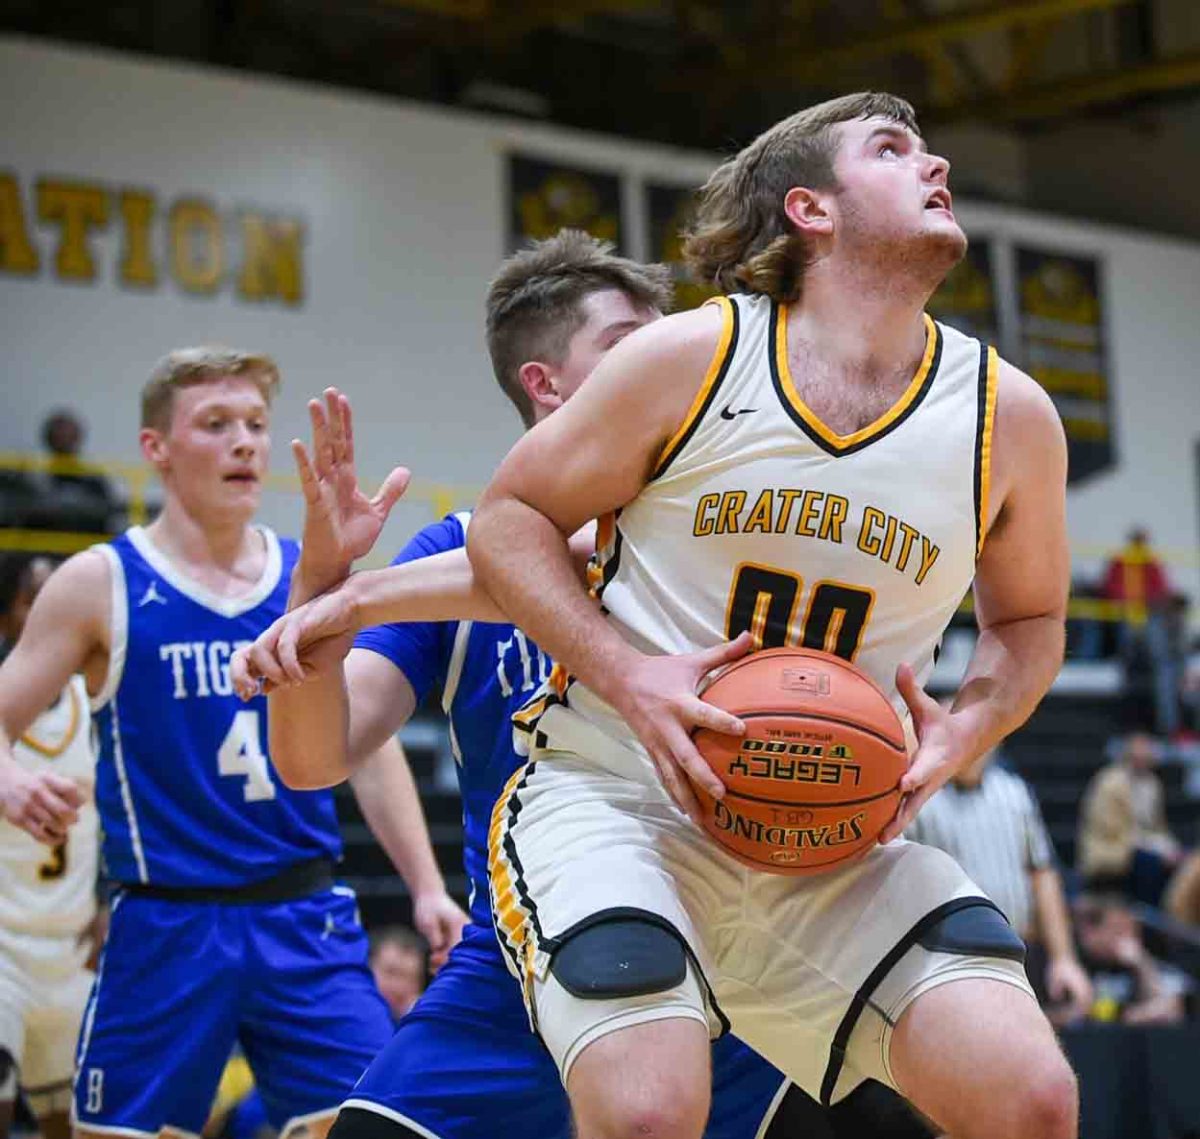 Middlesboro senior center Bryce Bowling worked inside for two of his 11 points on Thursday in the Jackets 66-58 win over visiting Barbourville.